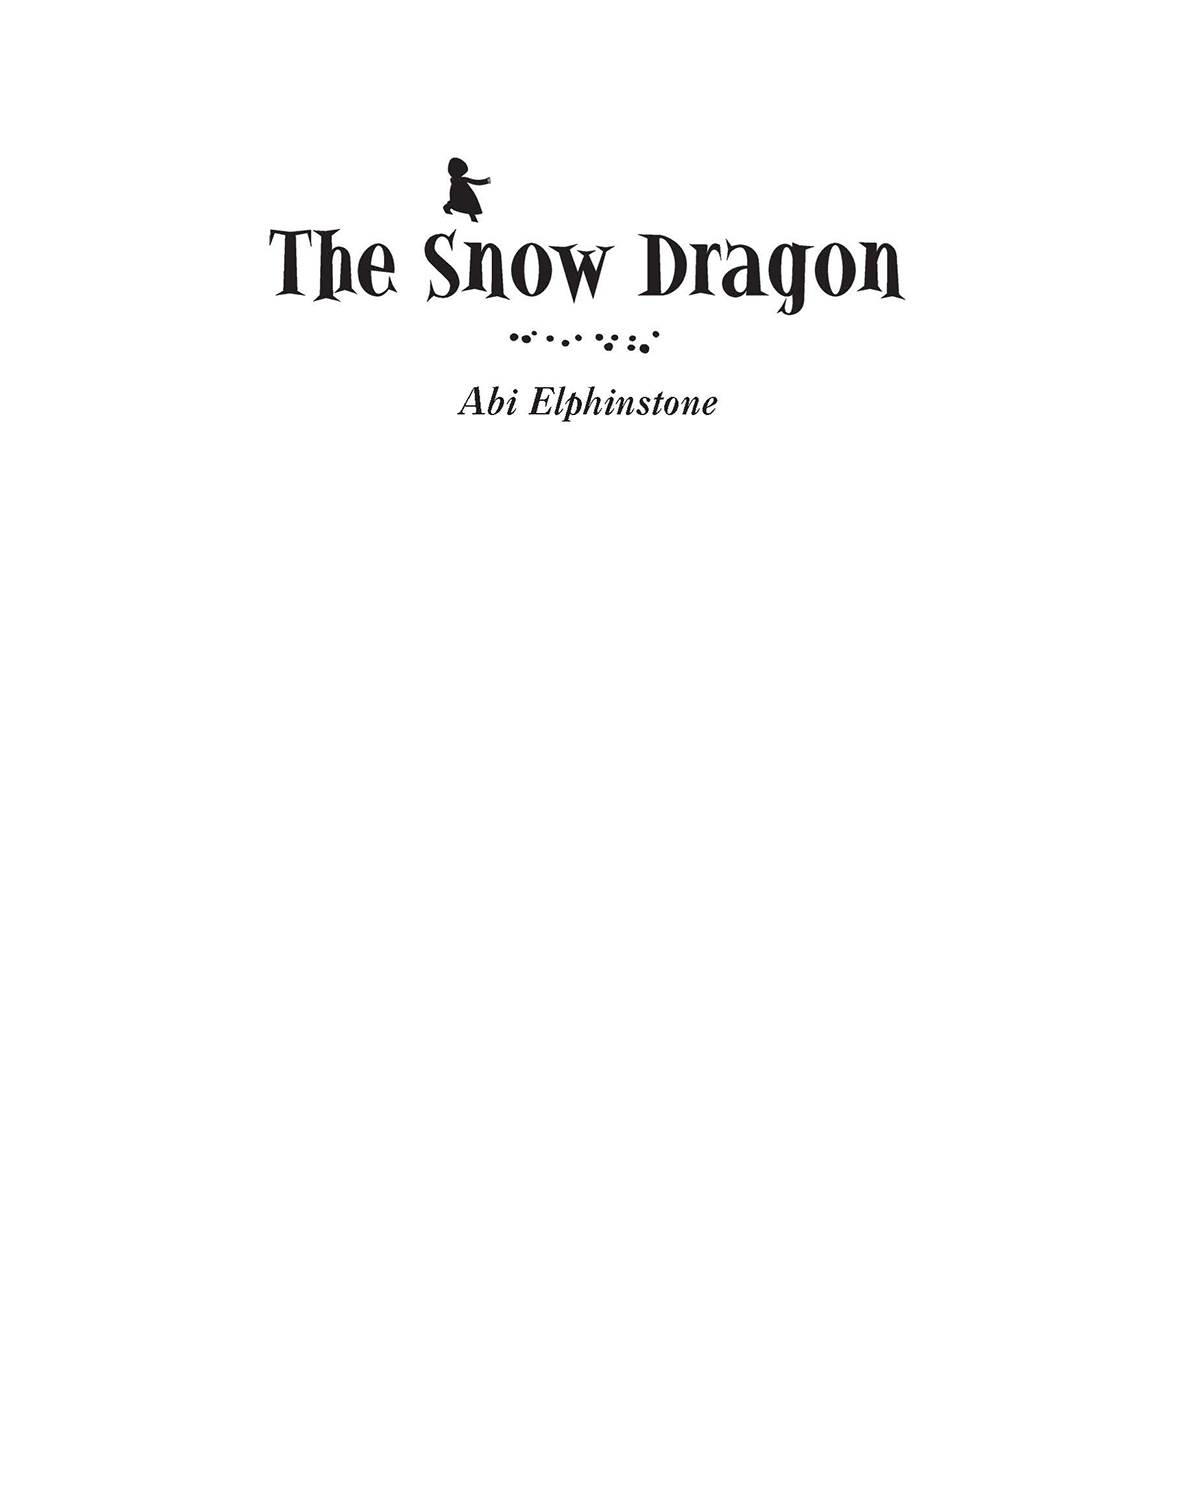 The Snow Dragon extract